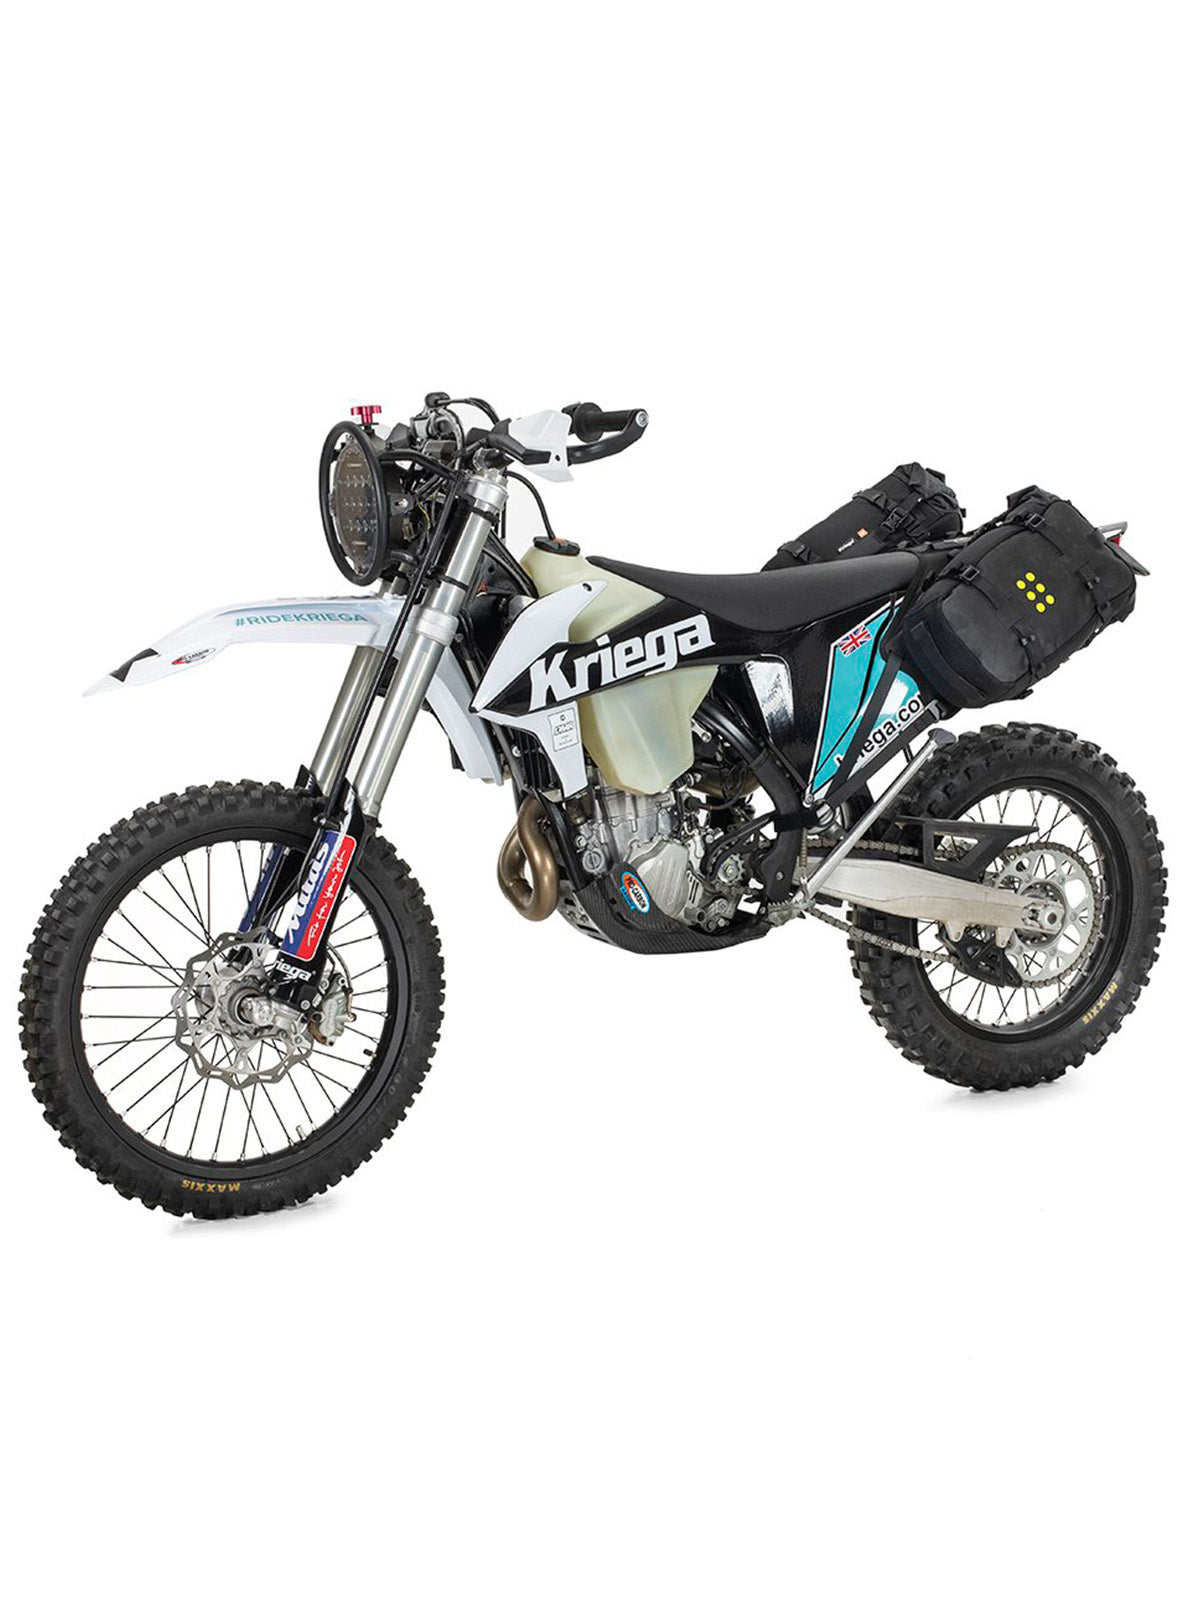 Kriega OS BASE Dirtbike on motorcycle with two OS6 adventure packs